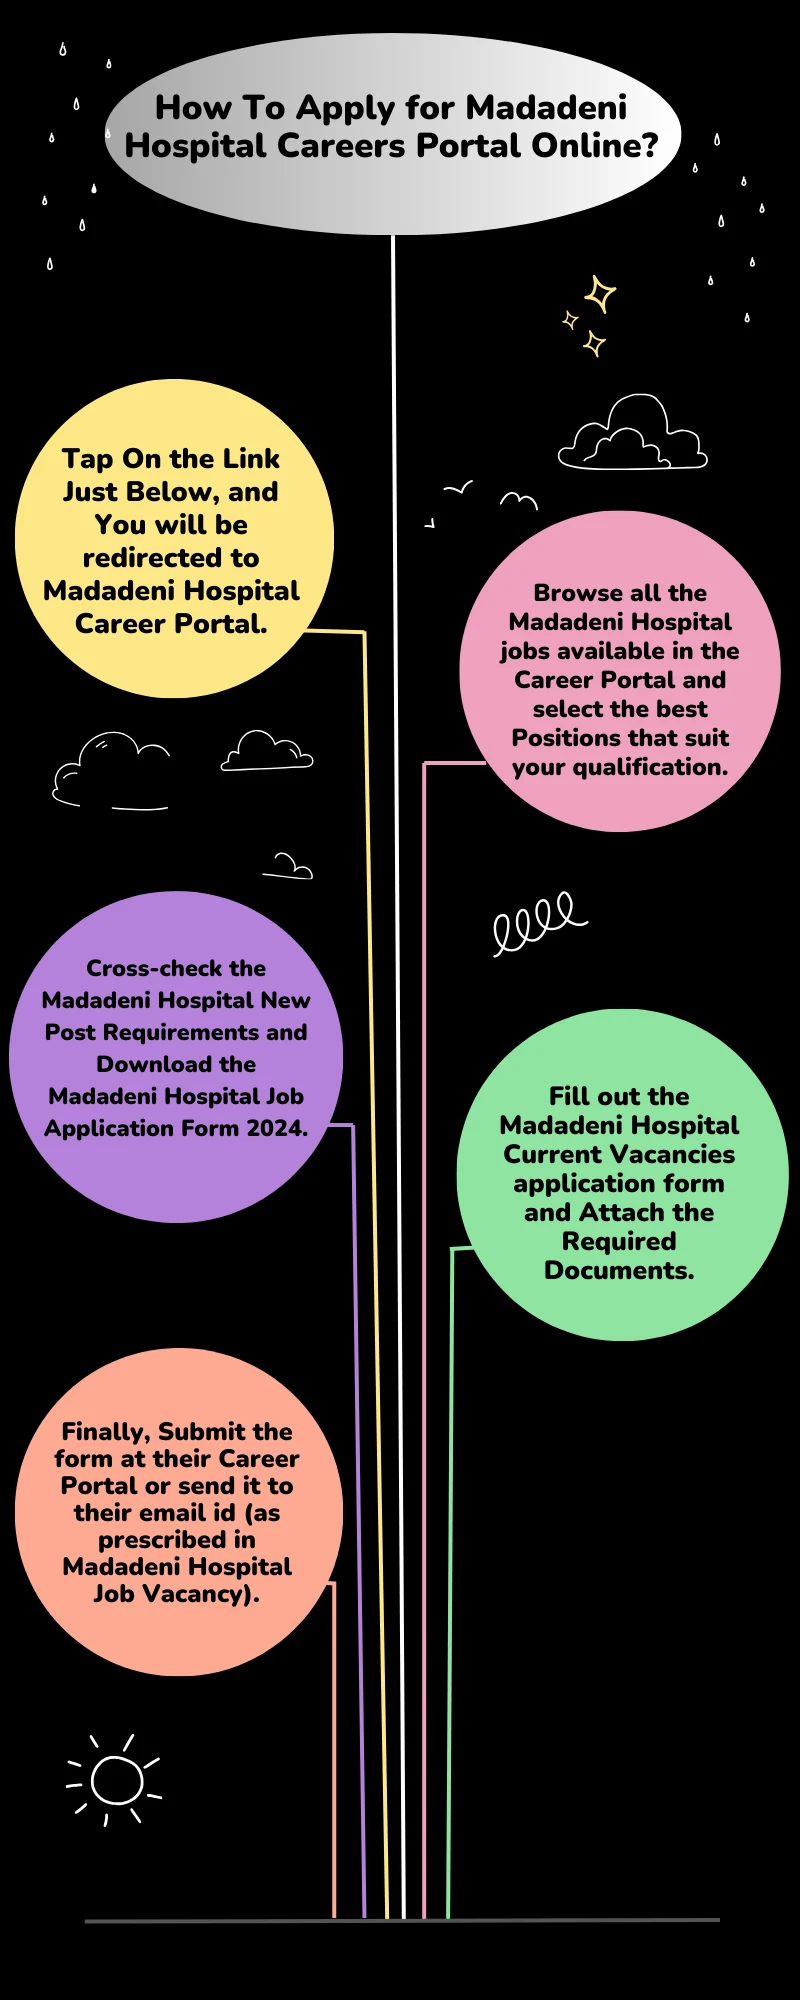 How To Apply for Madadeni Hospital Careers Portal Online?